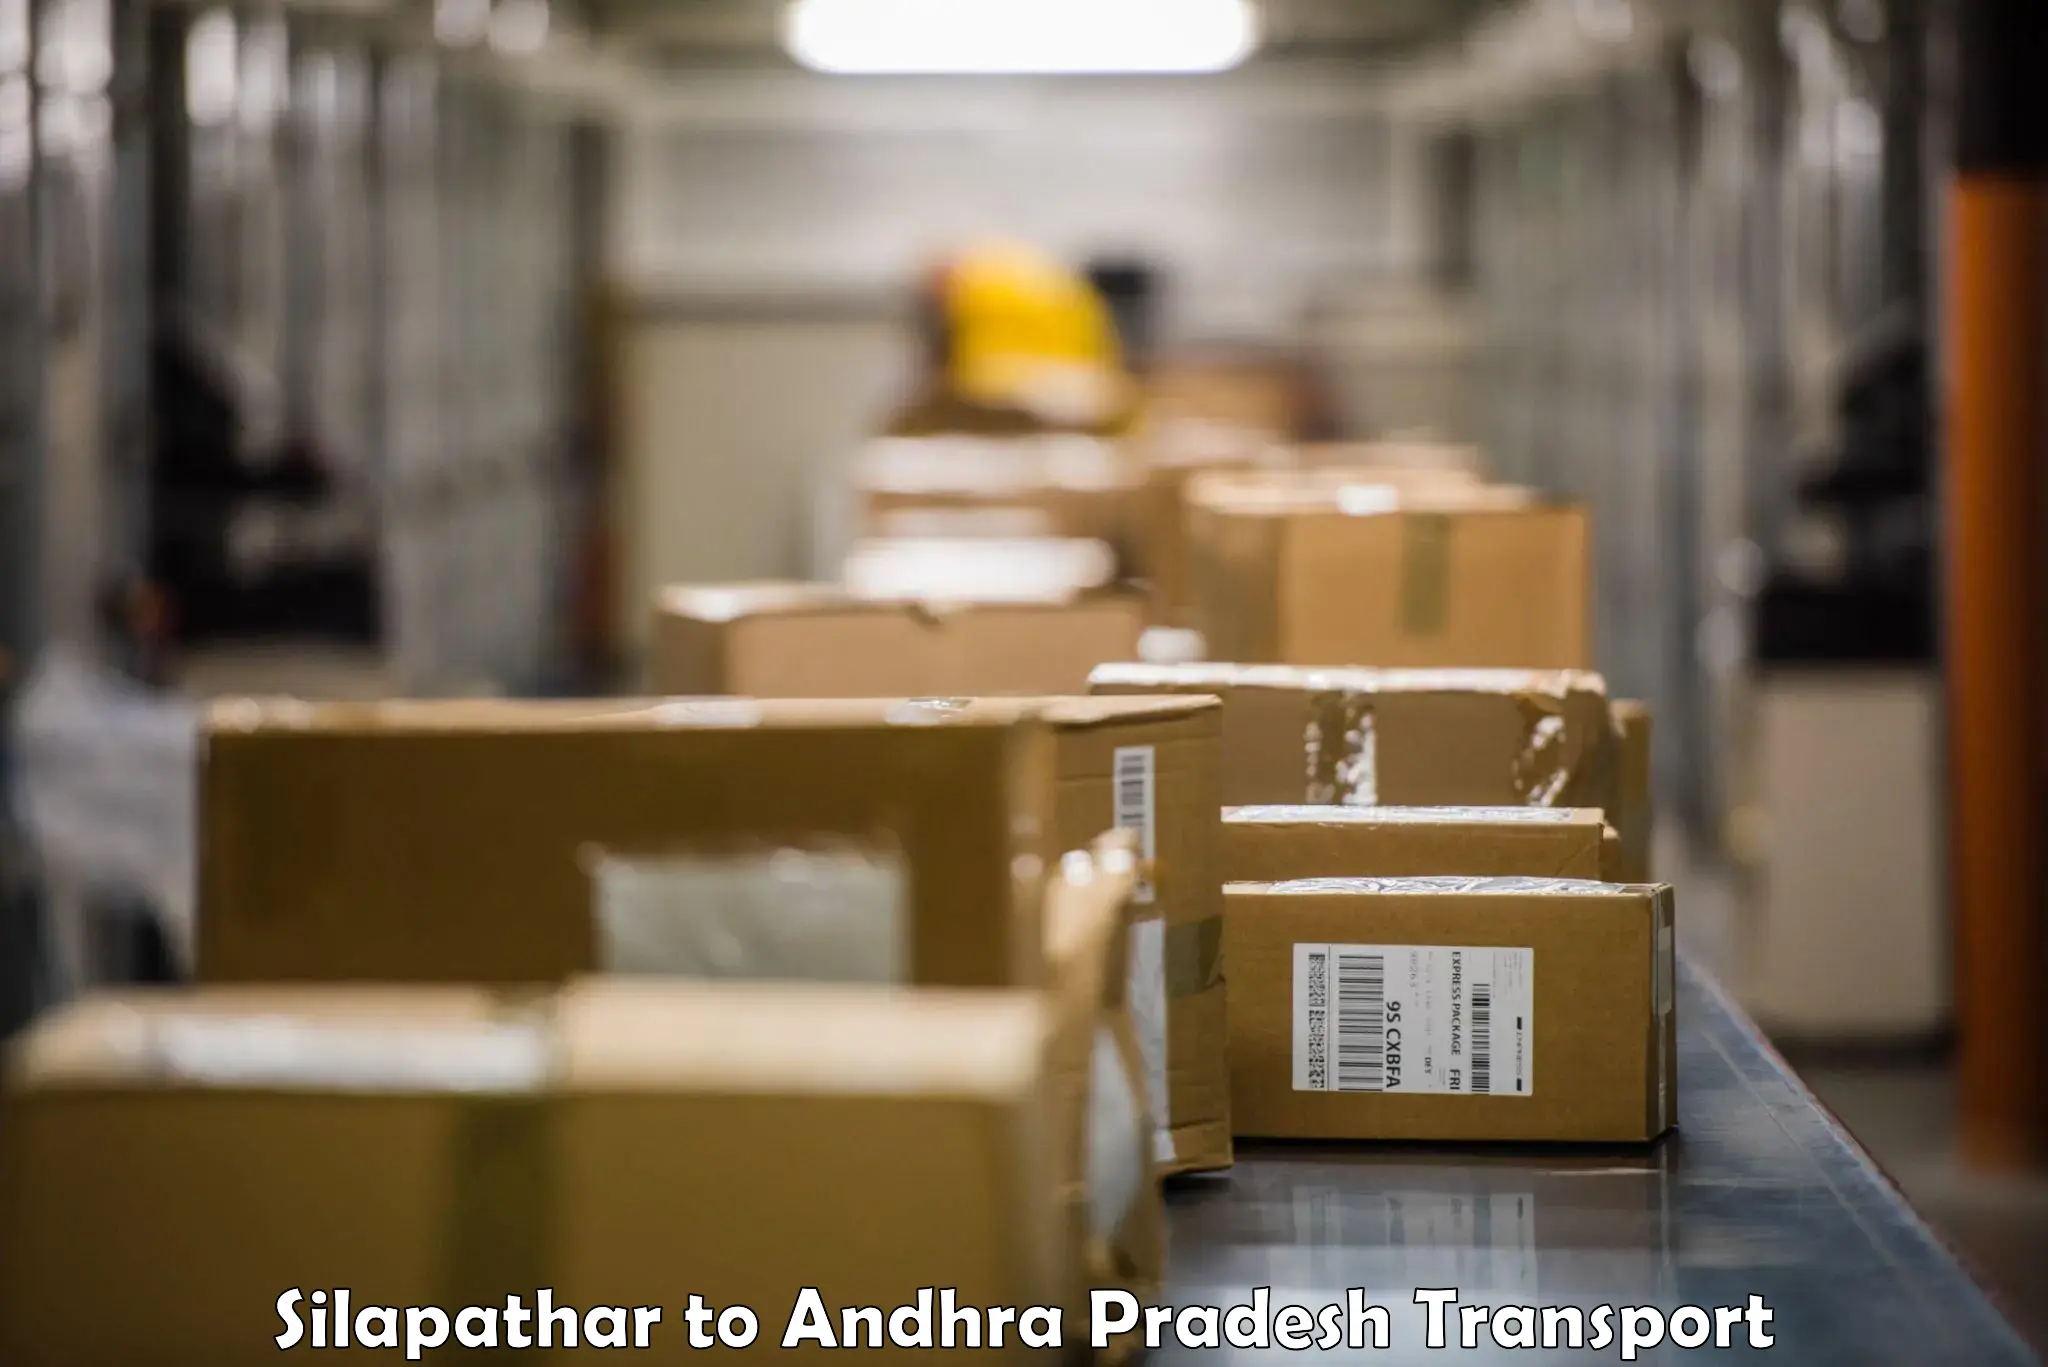 Transport shared services Silapathar to Visakhapatnam Port